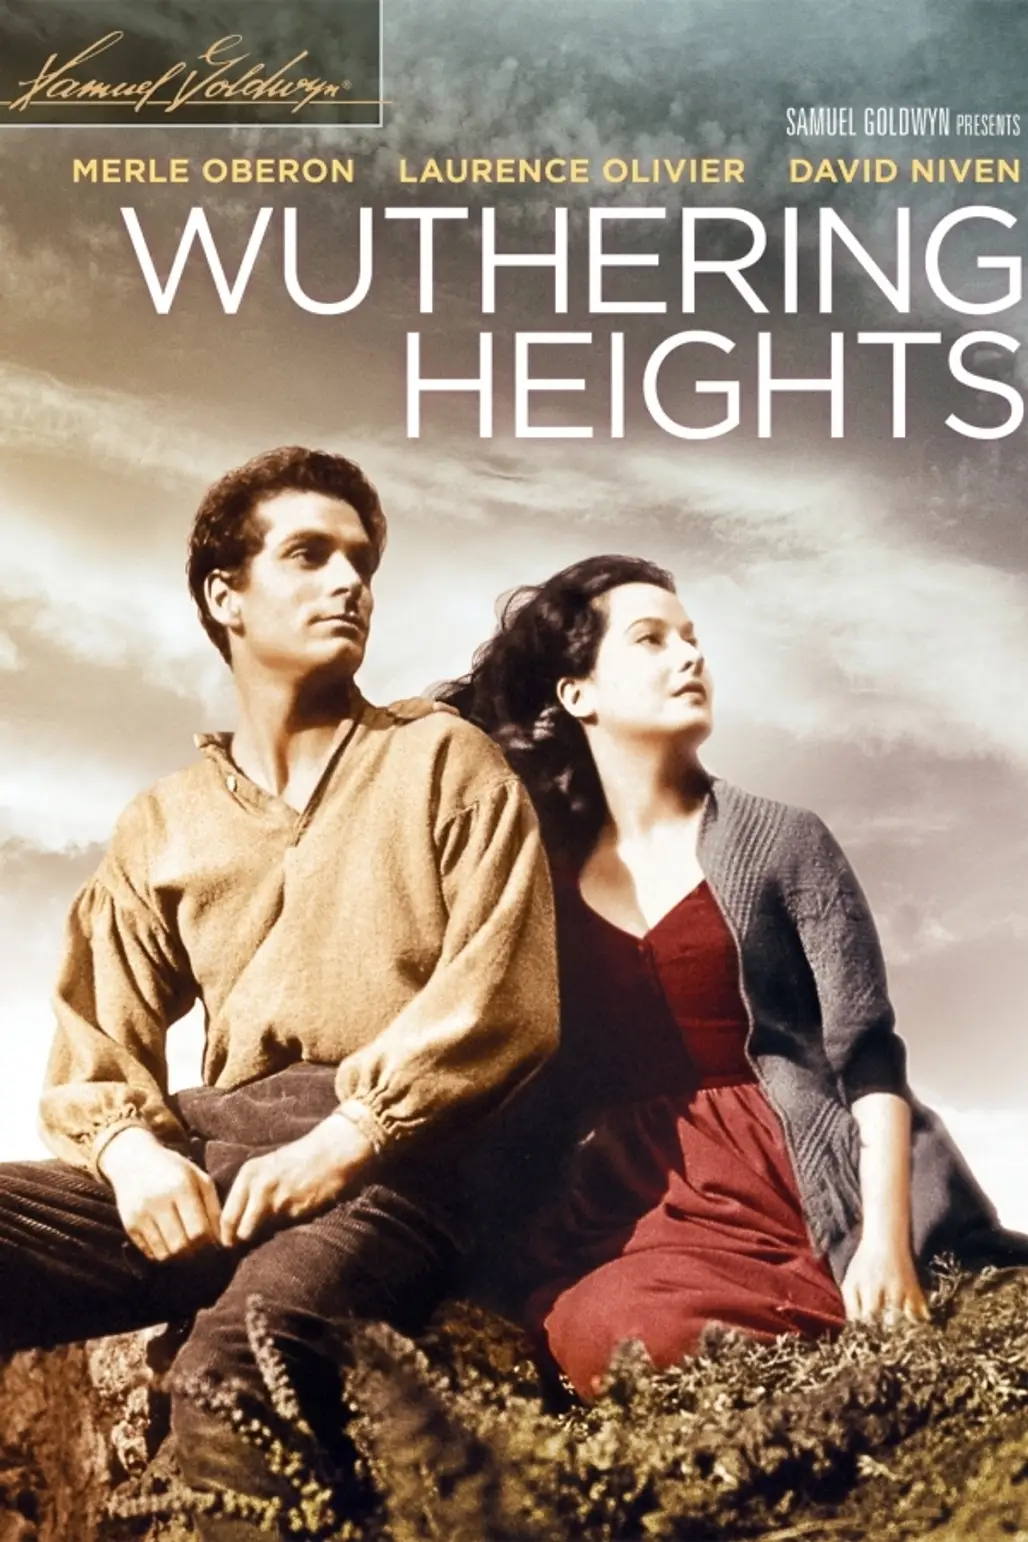 Wuthering Heights, 1939